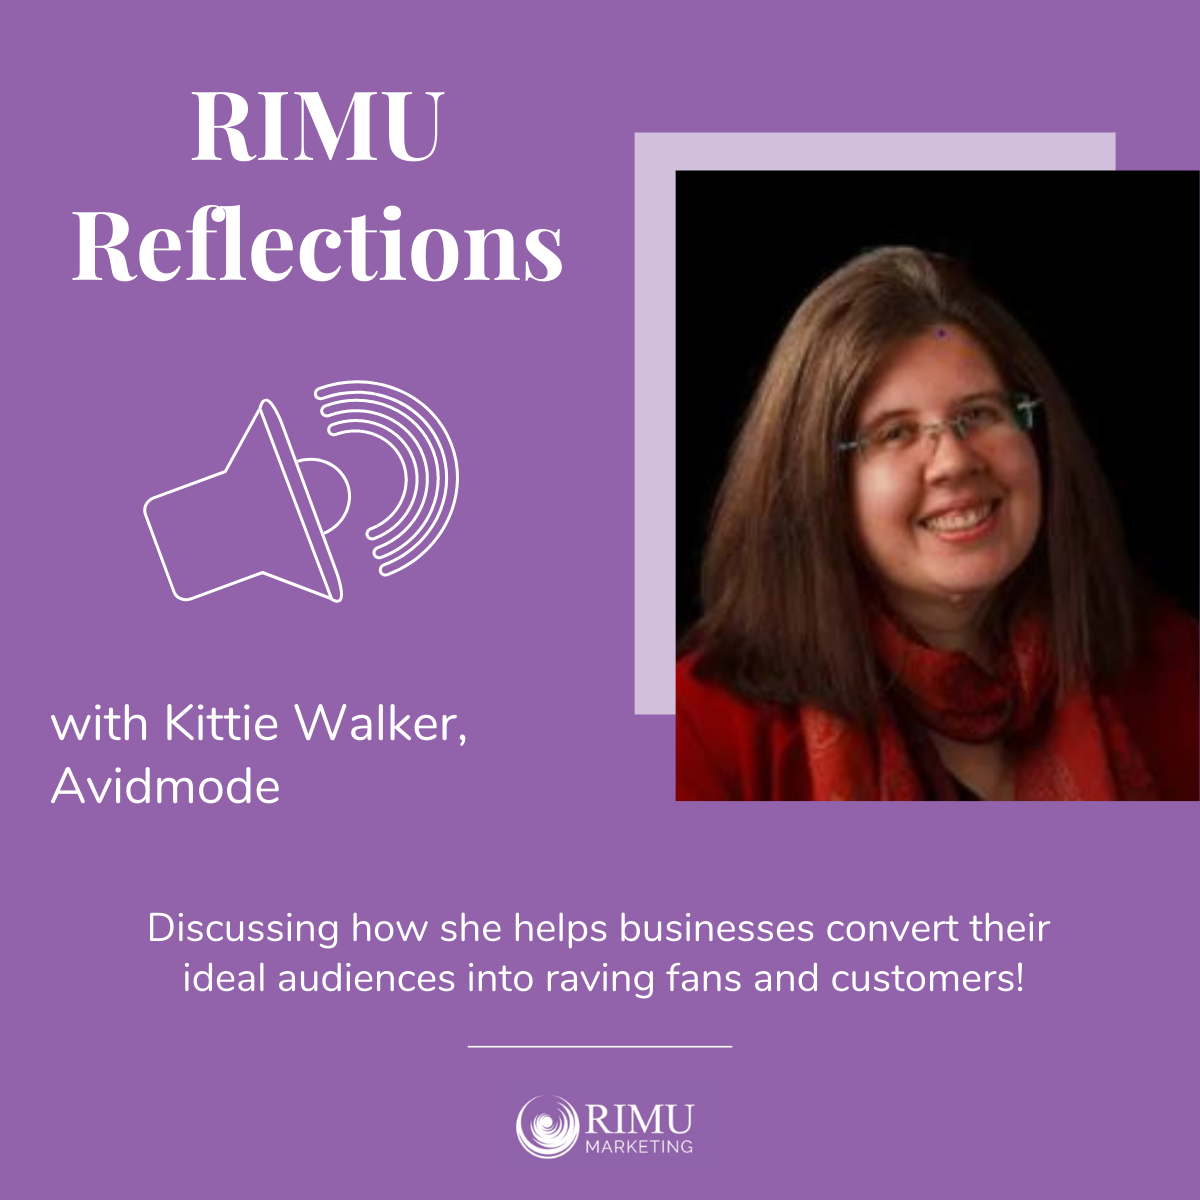 RIMU Reflections - an interview with Kittie Walker